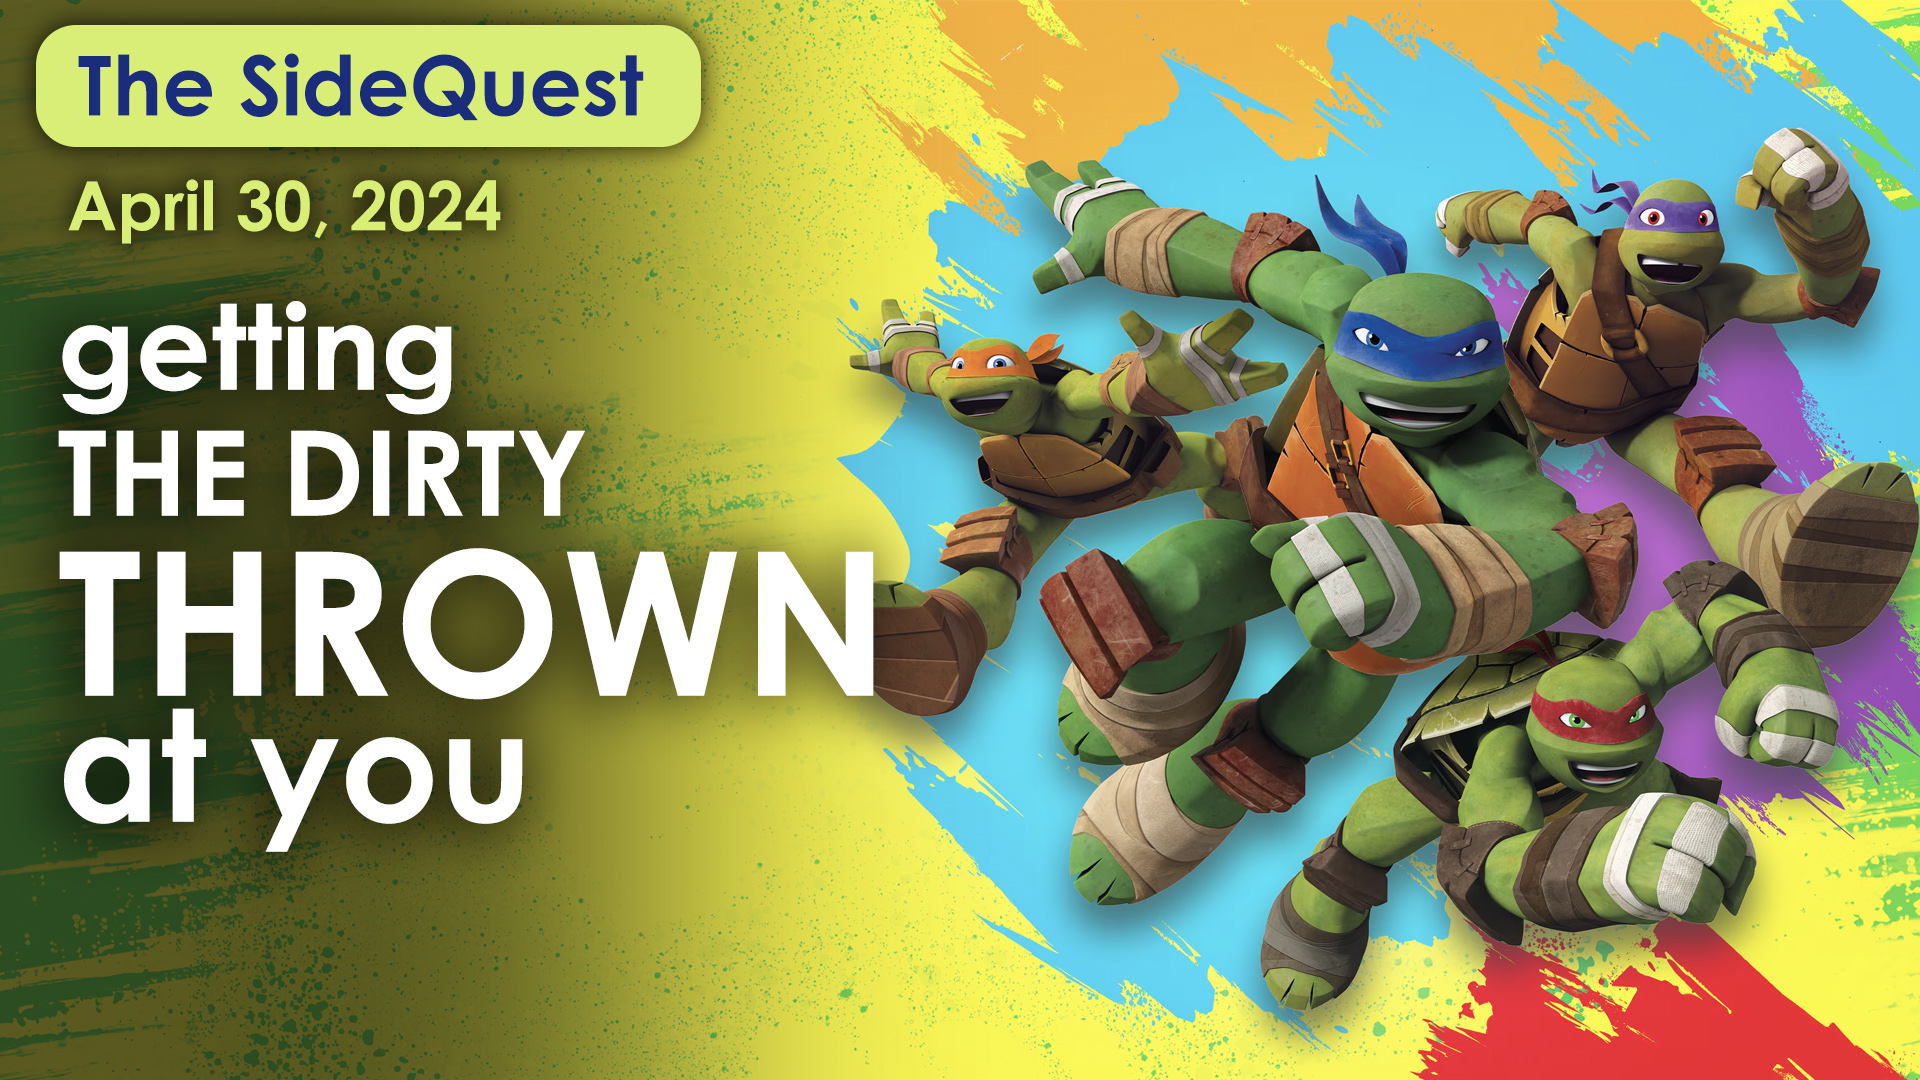 The SideQuest LIVE! April 30, 2024: Getting the Dirty Thrown At You